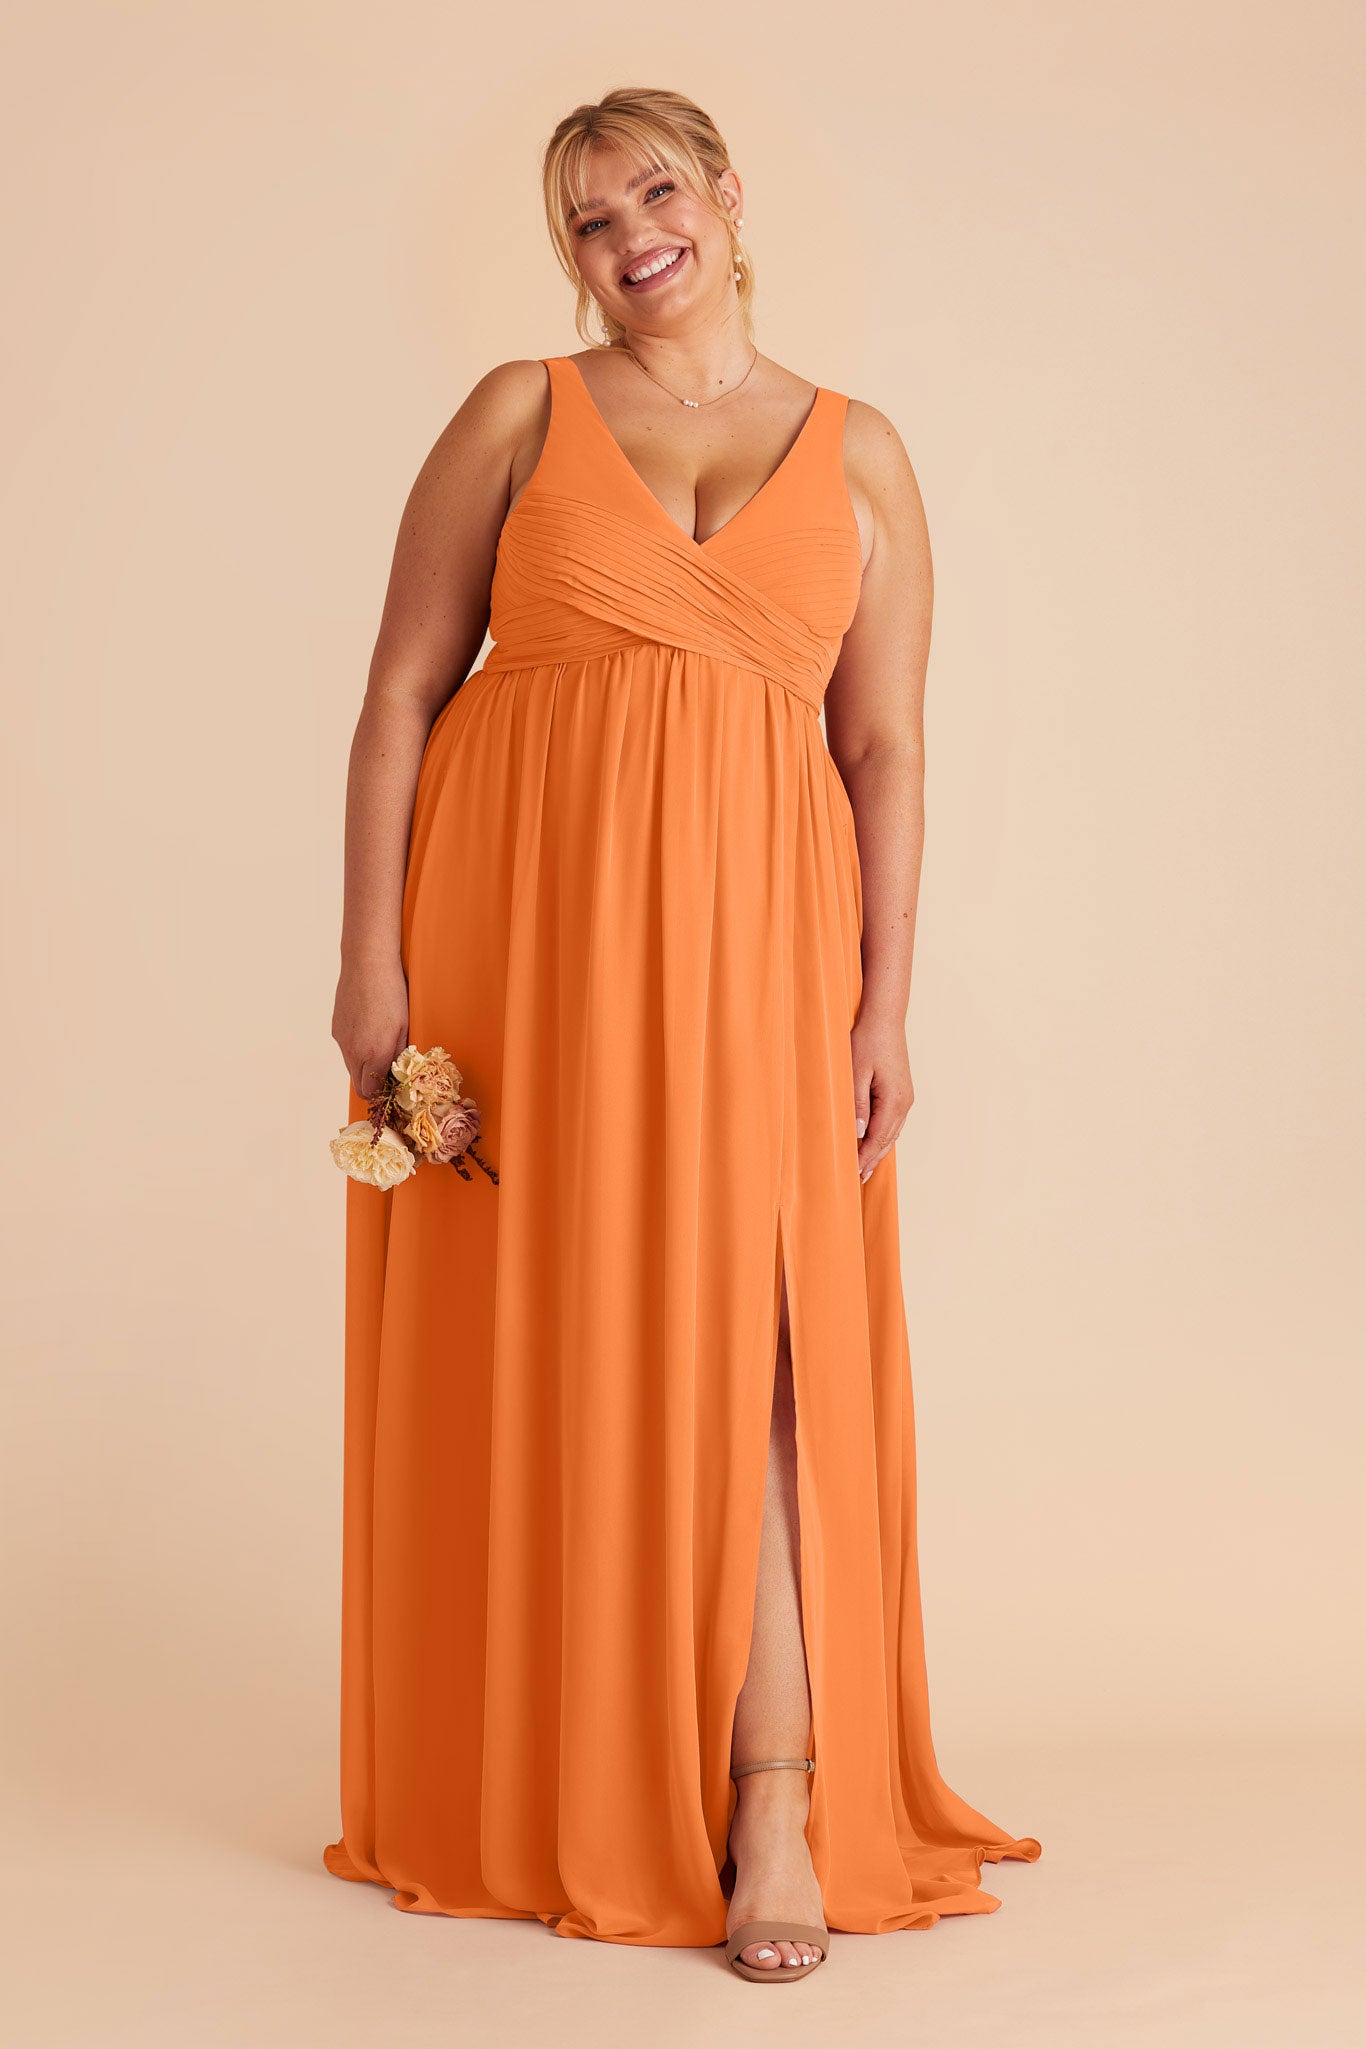 Laurie Apricot Empire Bridesmaid Dress